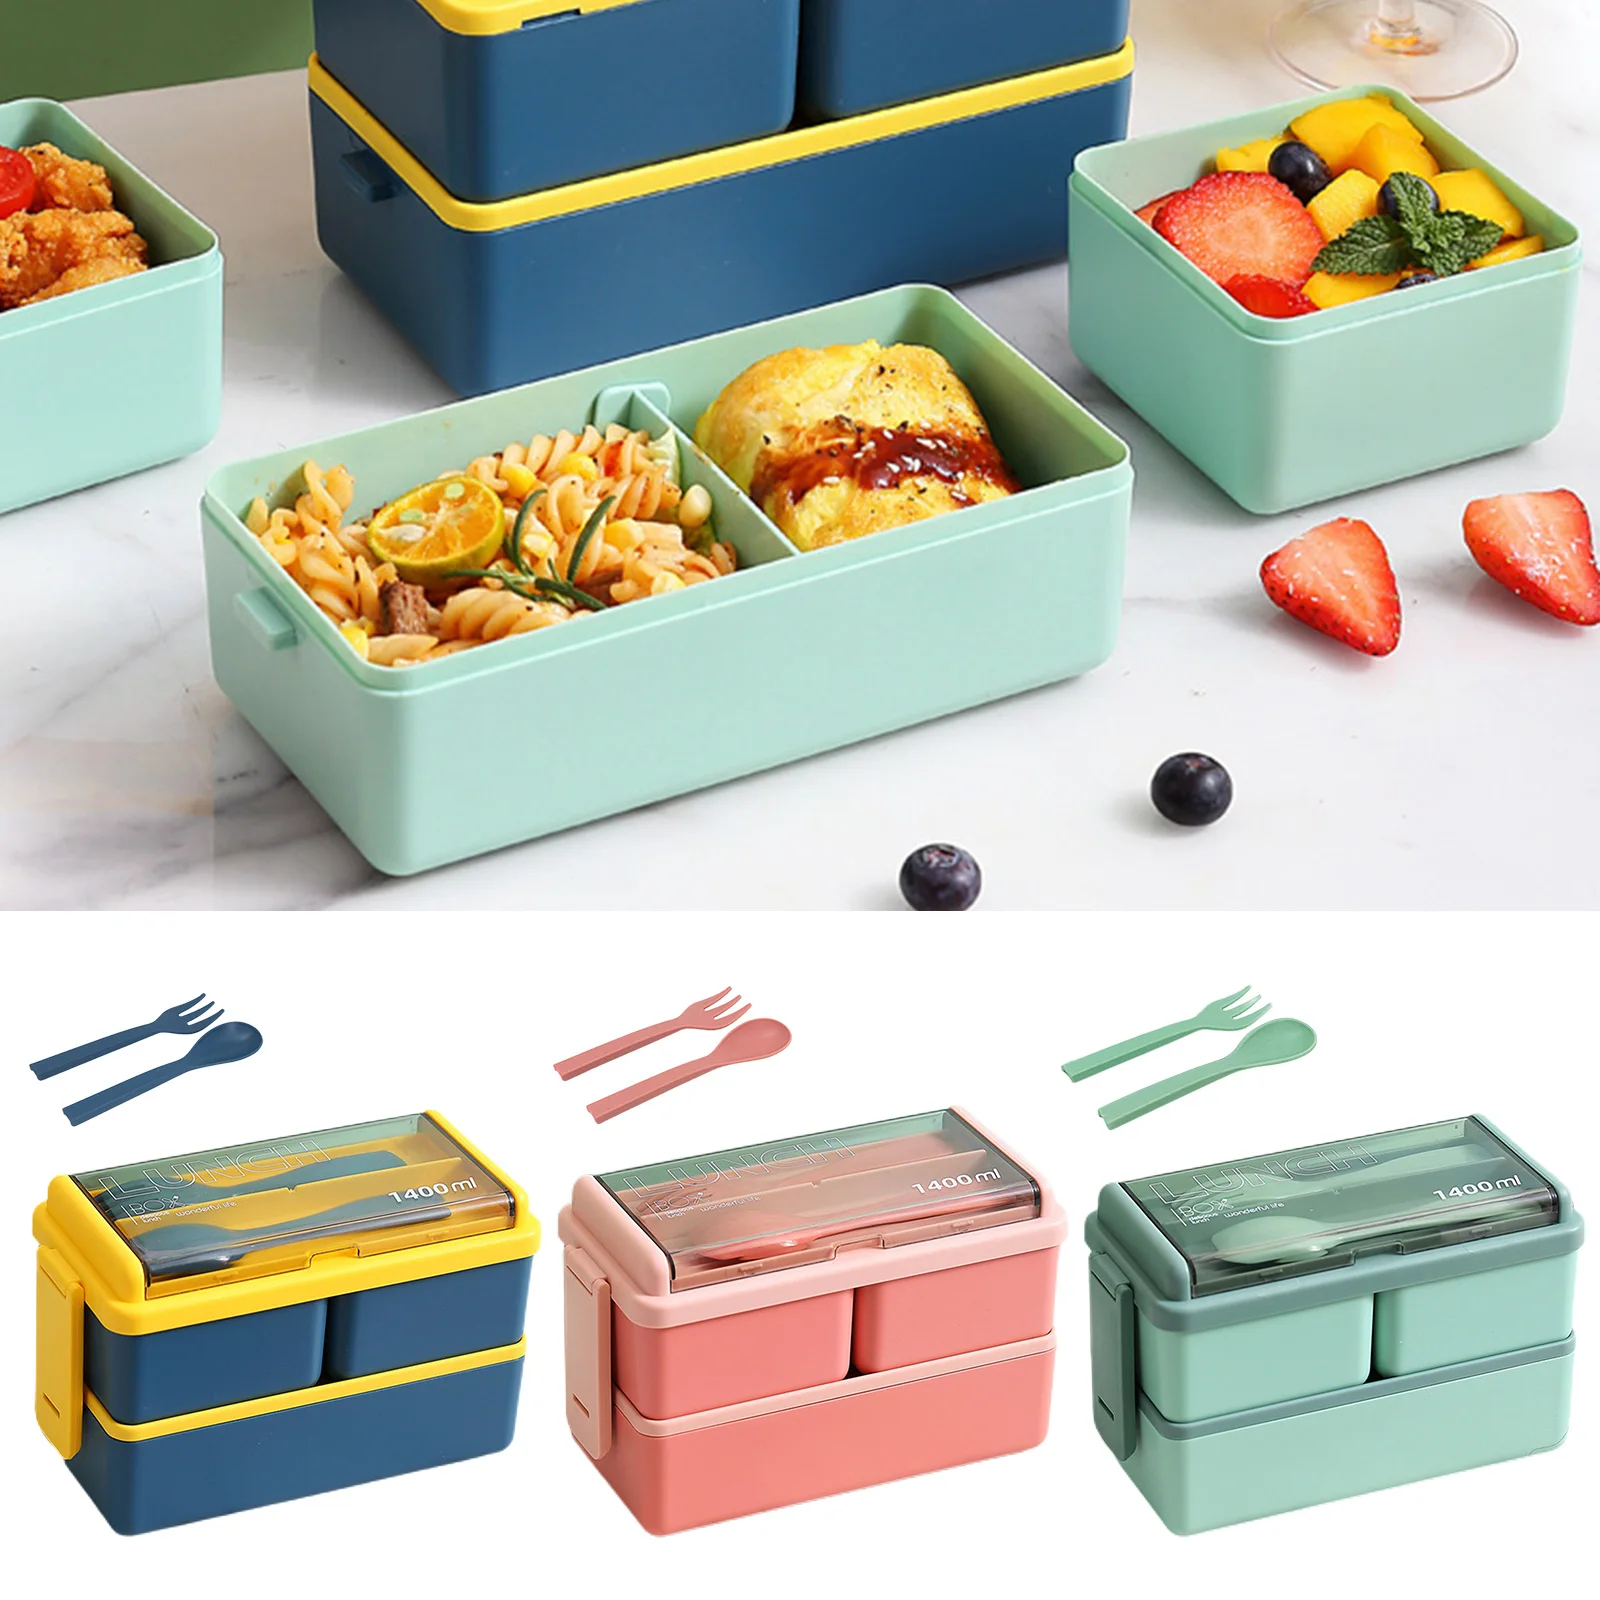 https://ae01.alicdn.com/kf/S197548f486224ba0ba9c29ca44141854I/1400ML-Meal-Prep-Container-Plastic-Double-Layer-Microwave-Bento-Boxes-Portable-Lunch-Containers-With-Utensil-Reusable.jpg